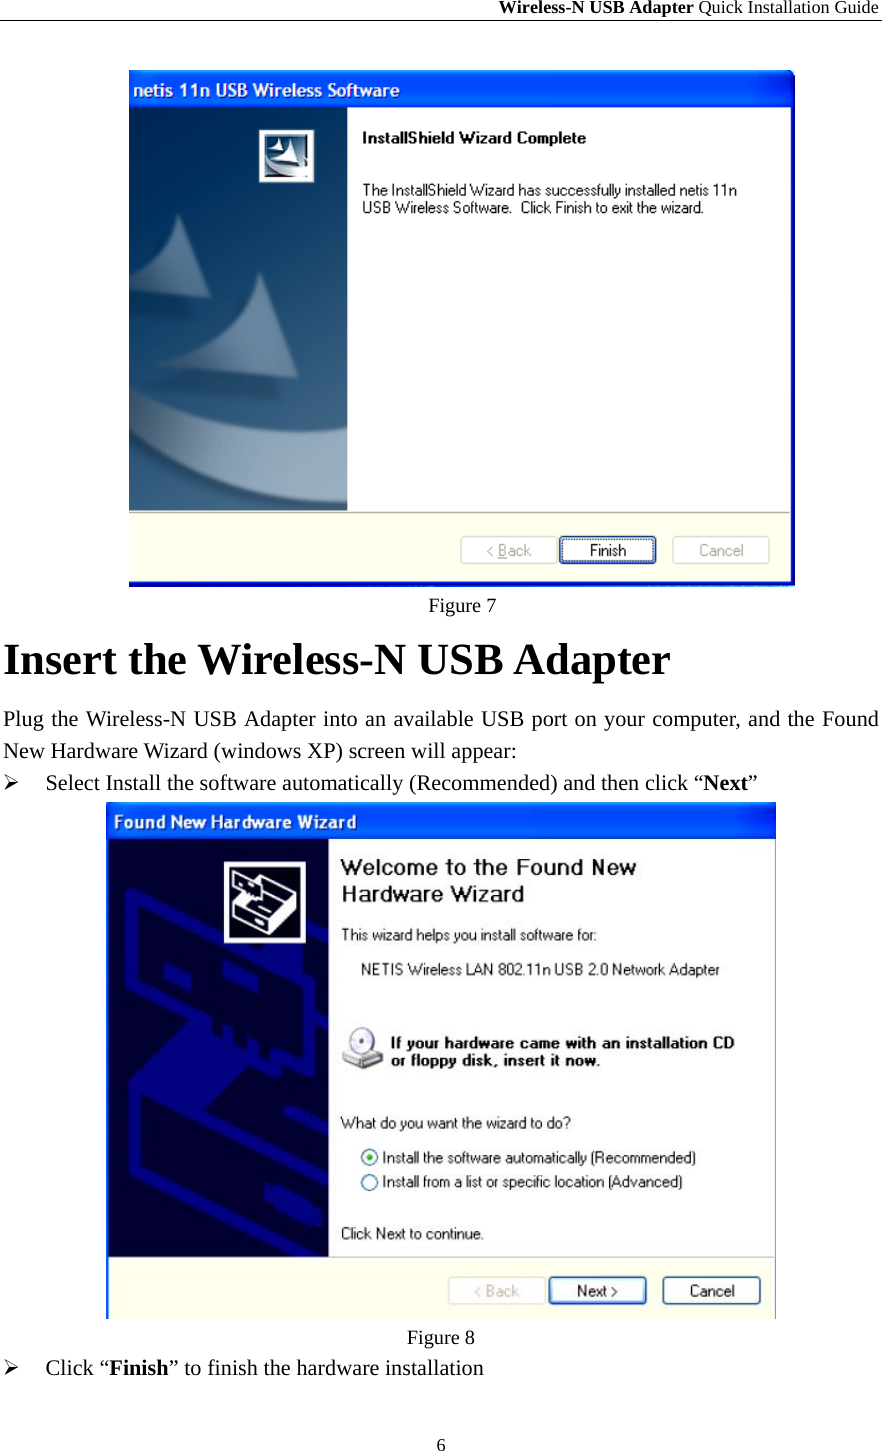 Wireless-N USB Adapter Quick Installation Guide 6  Figure 7 Insert the Wireless-N USB Adapter Plug the Wireless-N USB Adapter into an available USB port on your computer, and the Found New Hardware Wizard (windows XP) screen will appear: ¾ Select Install the software automatically (Recommended) and then click “Next”  Figure 8 ¾ Click “Finish” to finish the hardware installation 